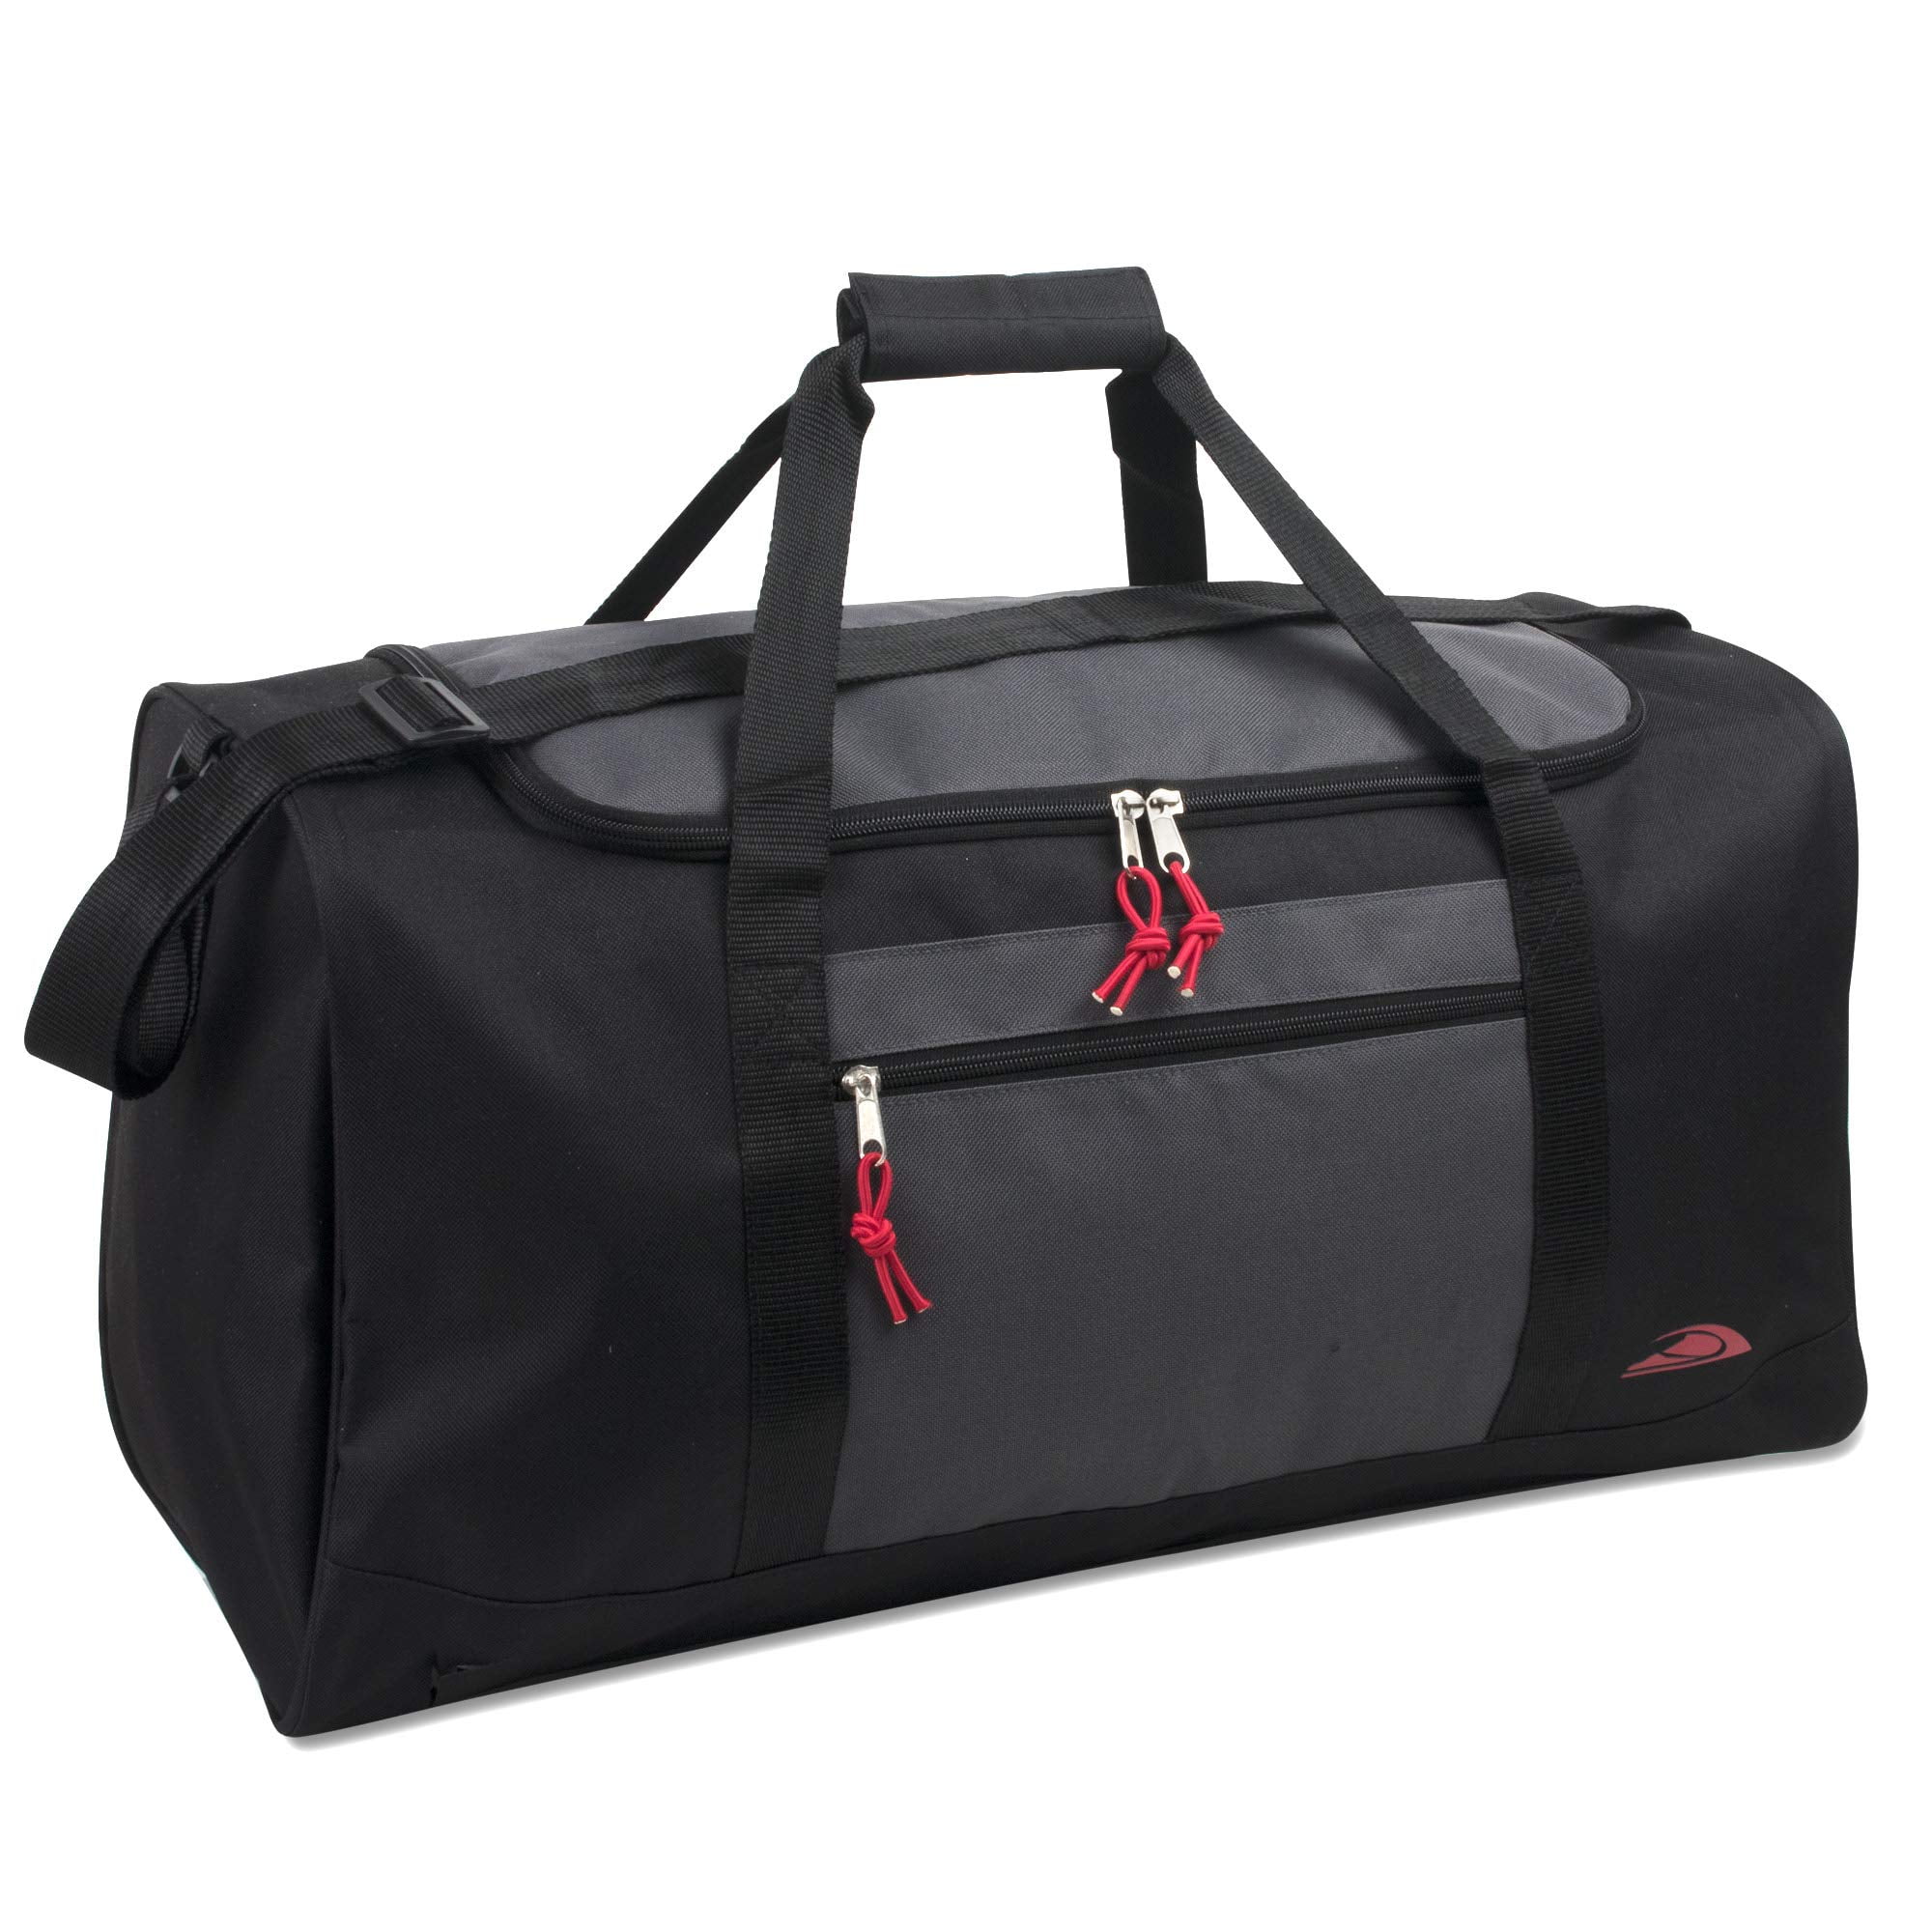 Trail Maker 55 Liter 24 inch Lightweight Canvas Duffle Bags for Men & Women for Traveling The Gym and As Sports Equipment Bag/Organizer (Red 1)